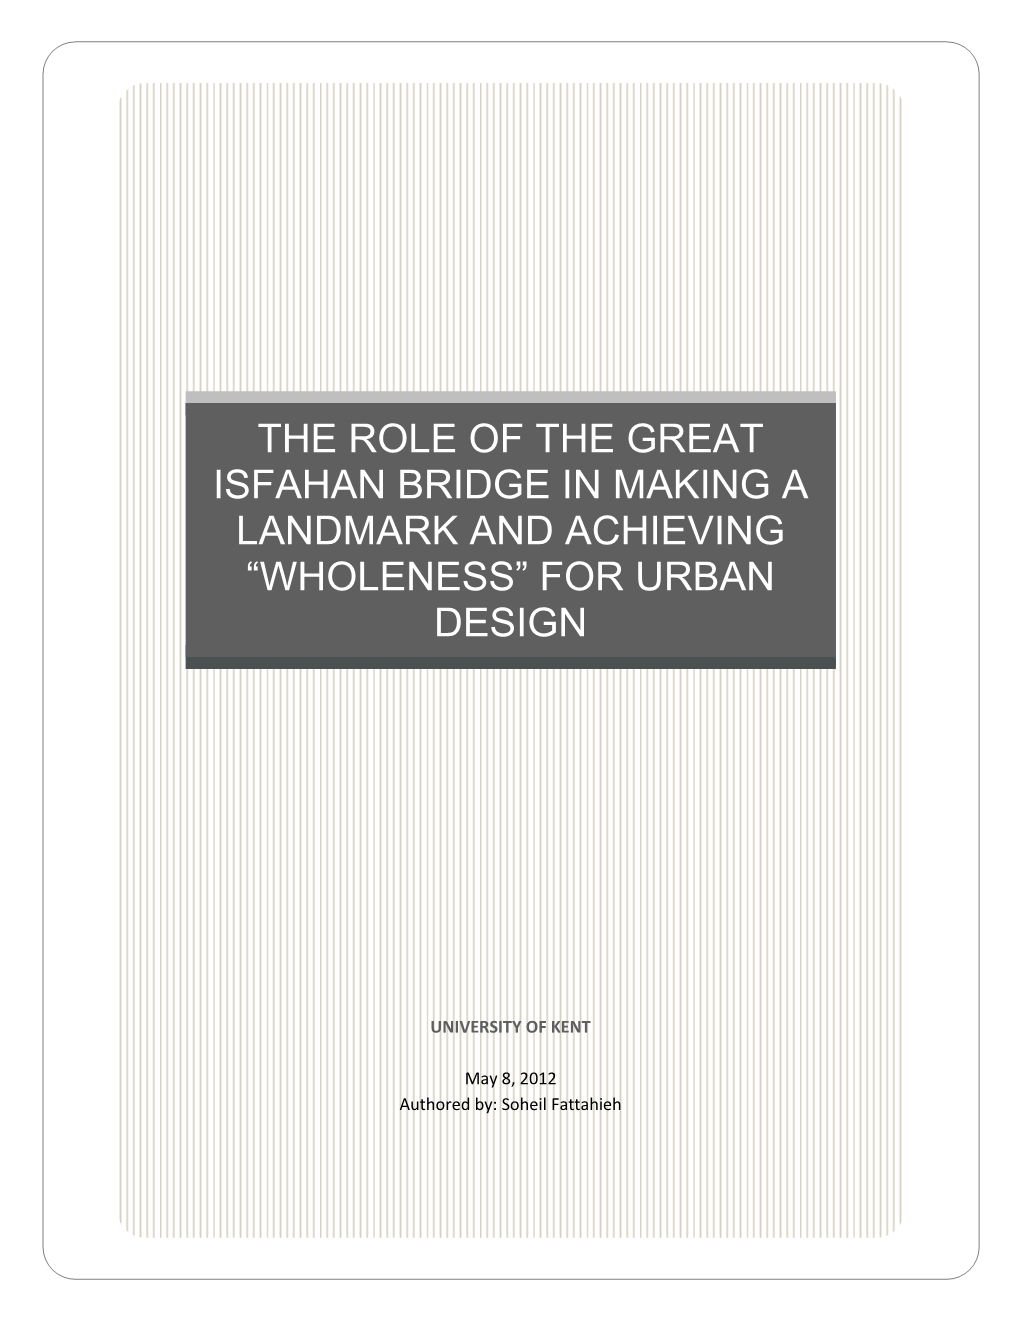 The Role of the Great Isfahan Bridge in Making a Landmark and Achieving “Wholeness” for Urban Design